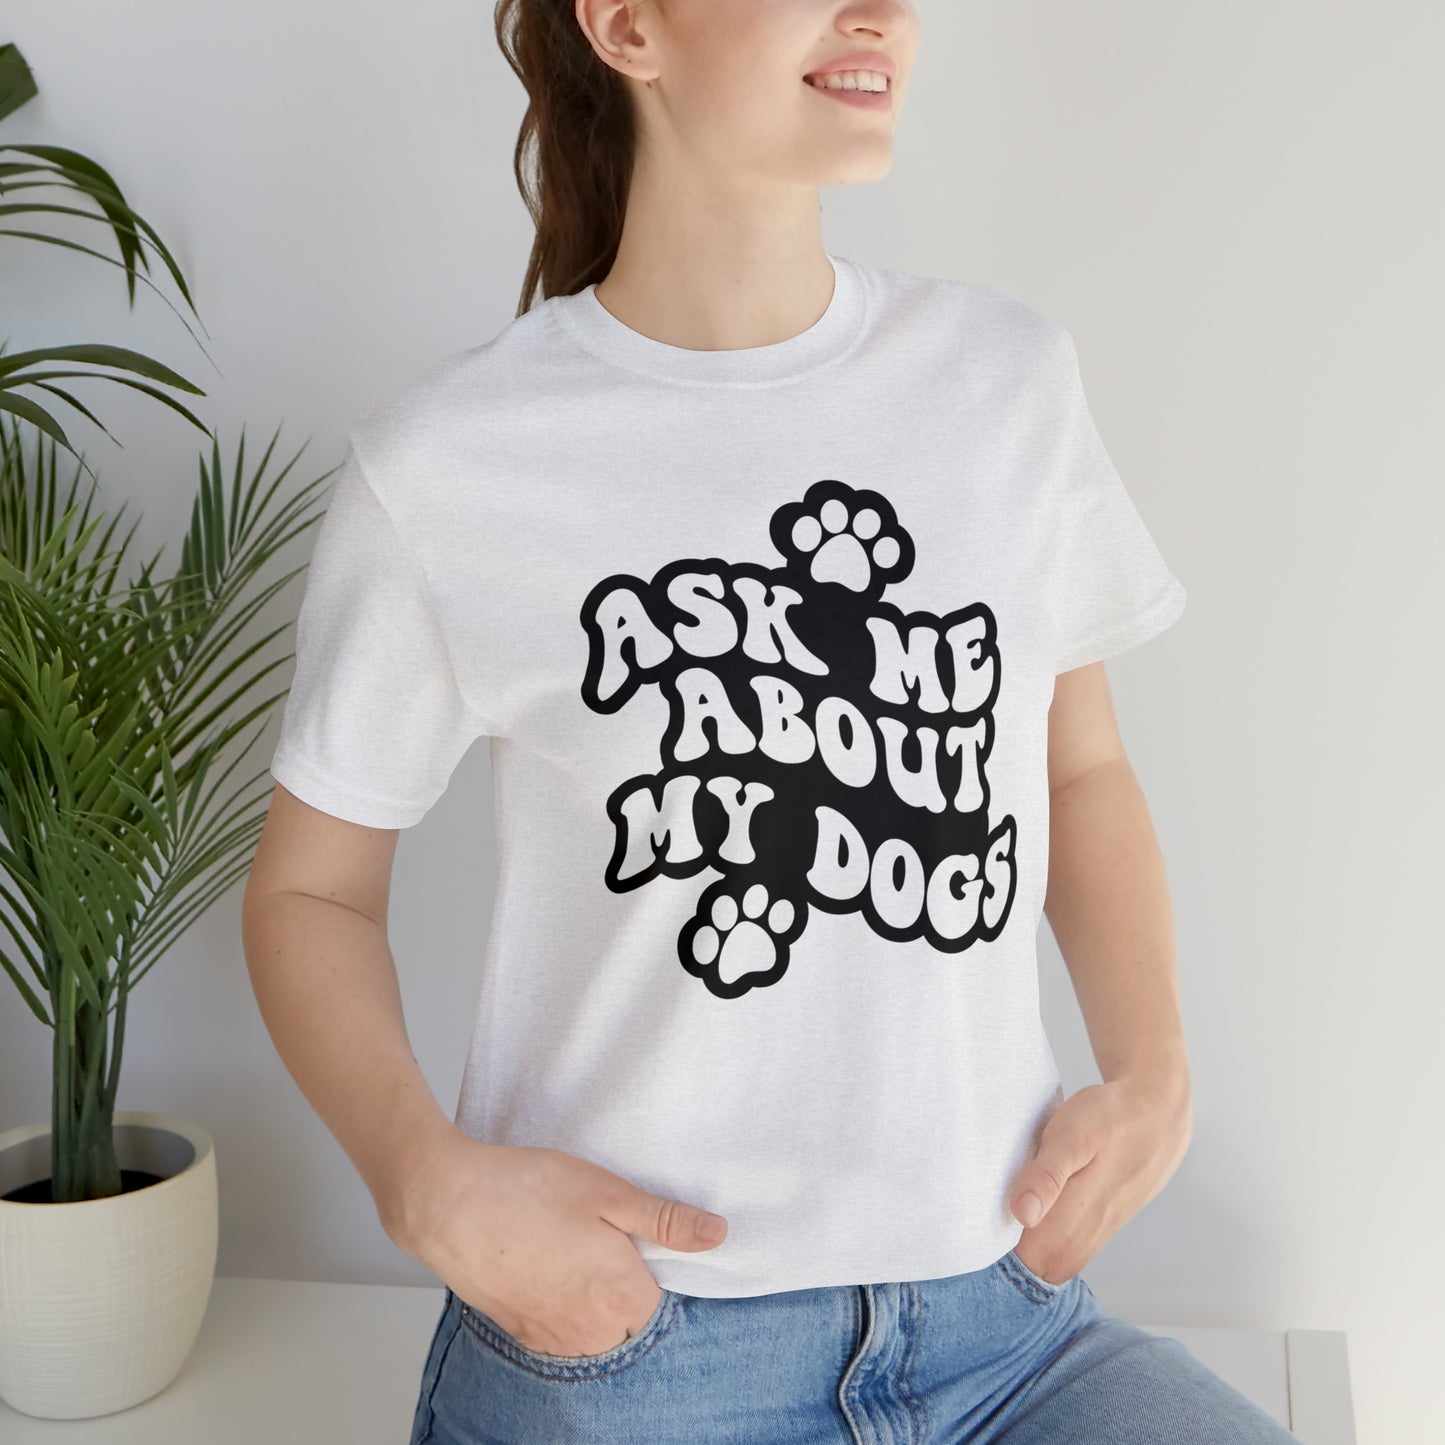 Ask Me About My Dogs Short Sleeve T-shirt